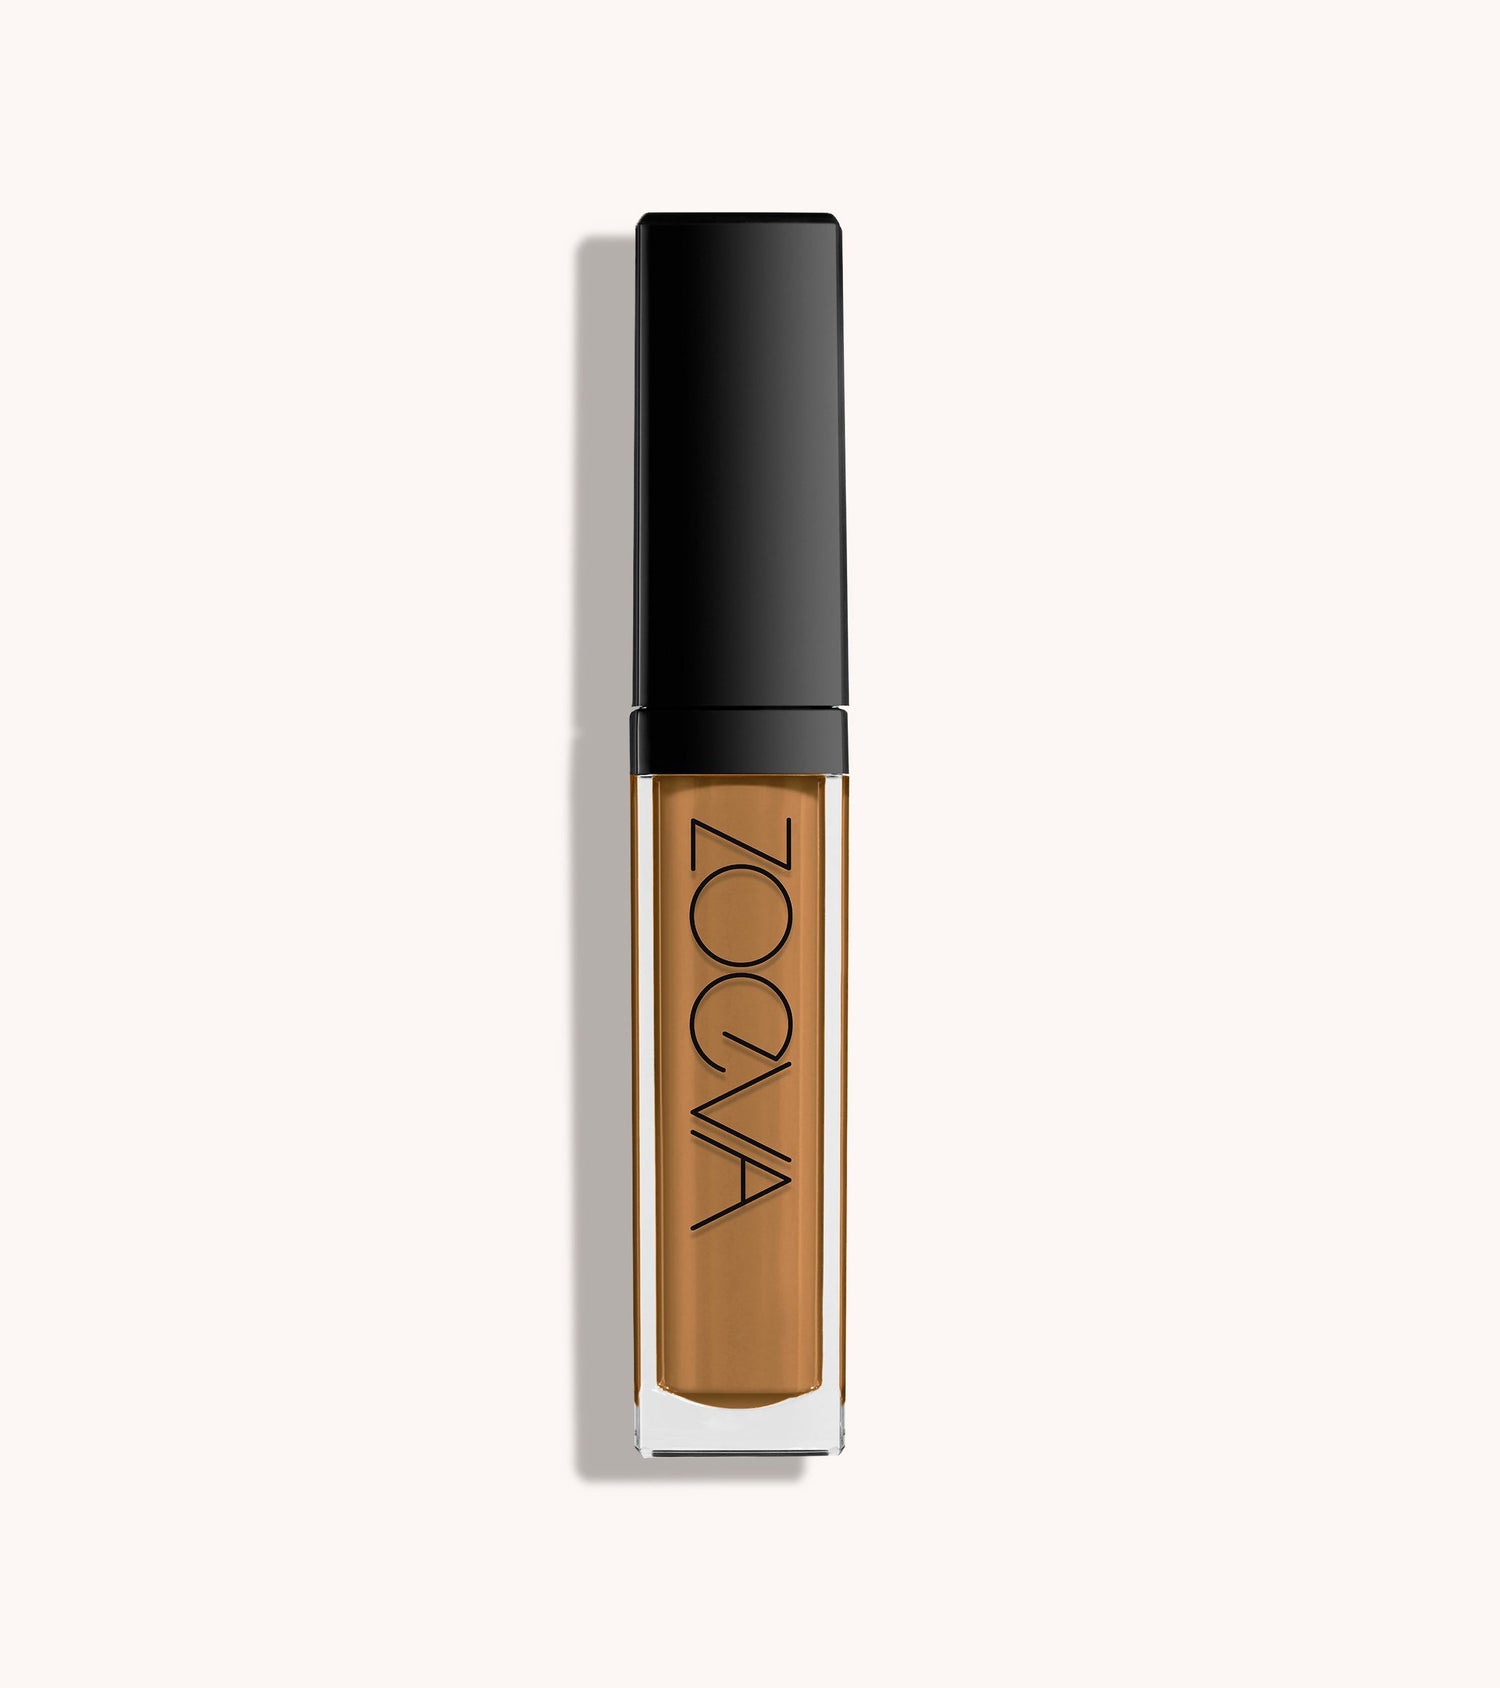 Authentik Skin Perfector Concealer (230 Reliable) Main Image featured